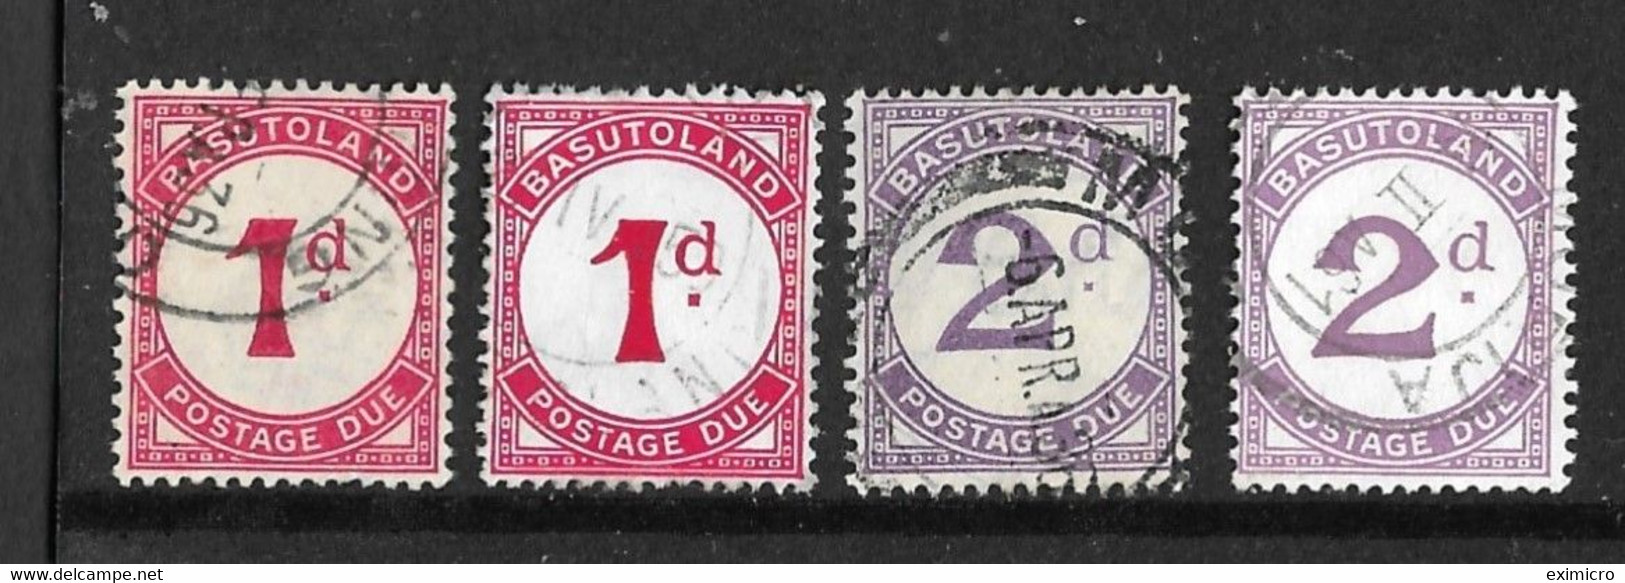 BASUTOLAND 1933 - 1952 POSTAGE DUE SET SG D1, D1b, D2, D2a BOTH ORDINARY AND CHALK-SURFACED PAPERS FINE USED Cat £92 - Portomarken